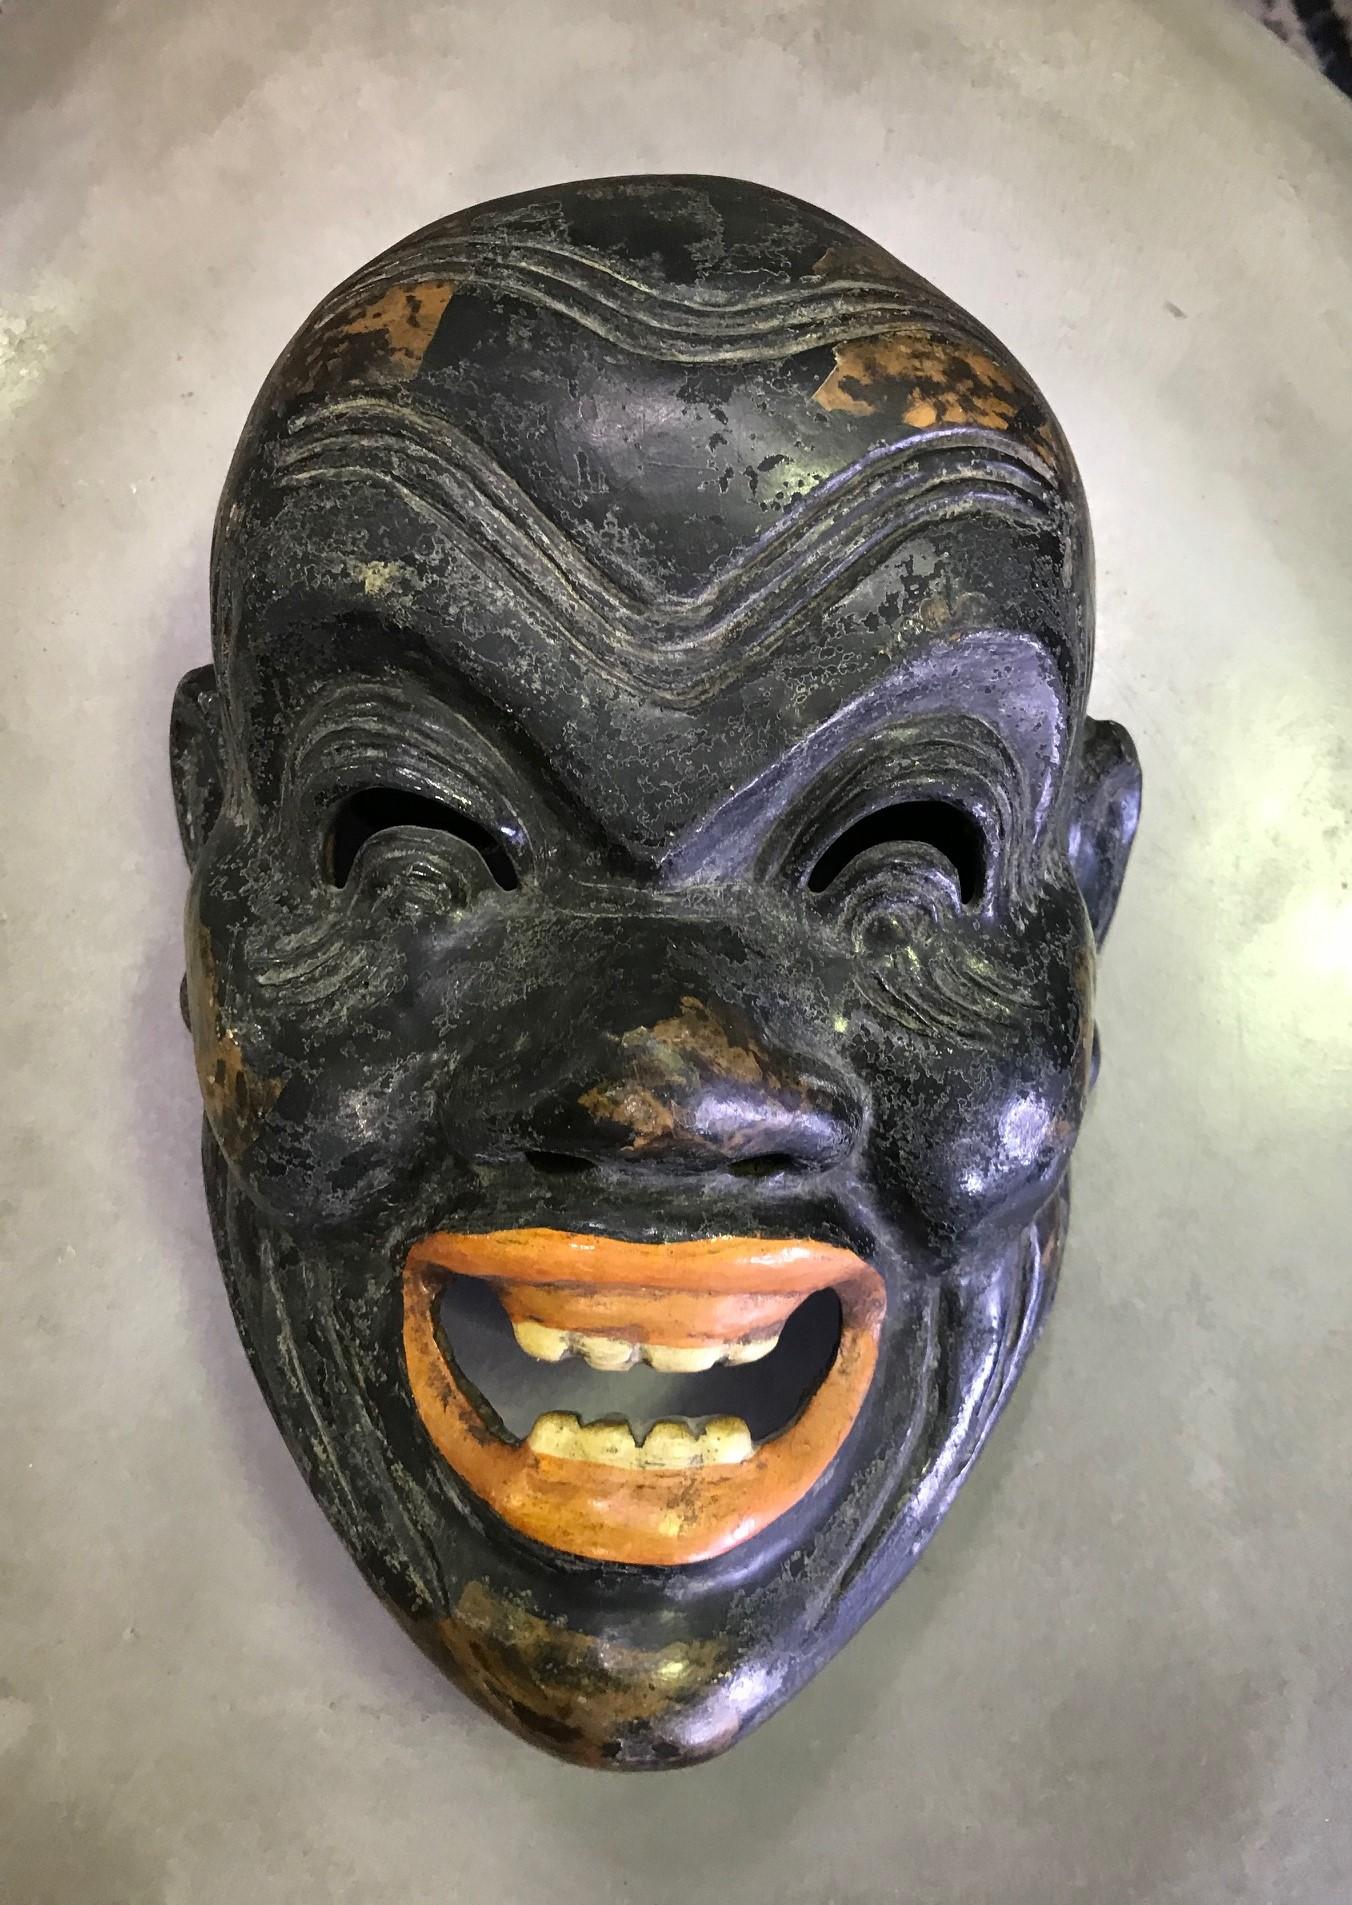 A rather wonderful, albeit a little frightening, Japanese Kagura mask, clearly made for and used by a Japanese Noh theater actor.

The mask is handcrafted. The maker uses a process of hemp cloth mixed with wood dust and lacquer so that the mask is